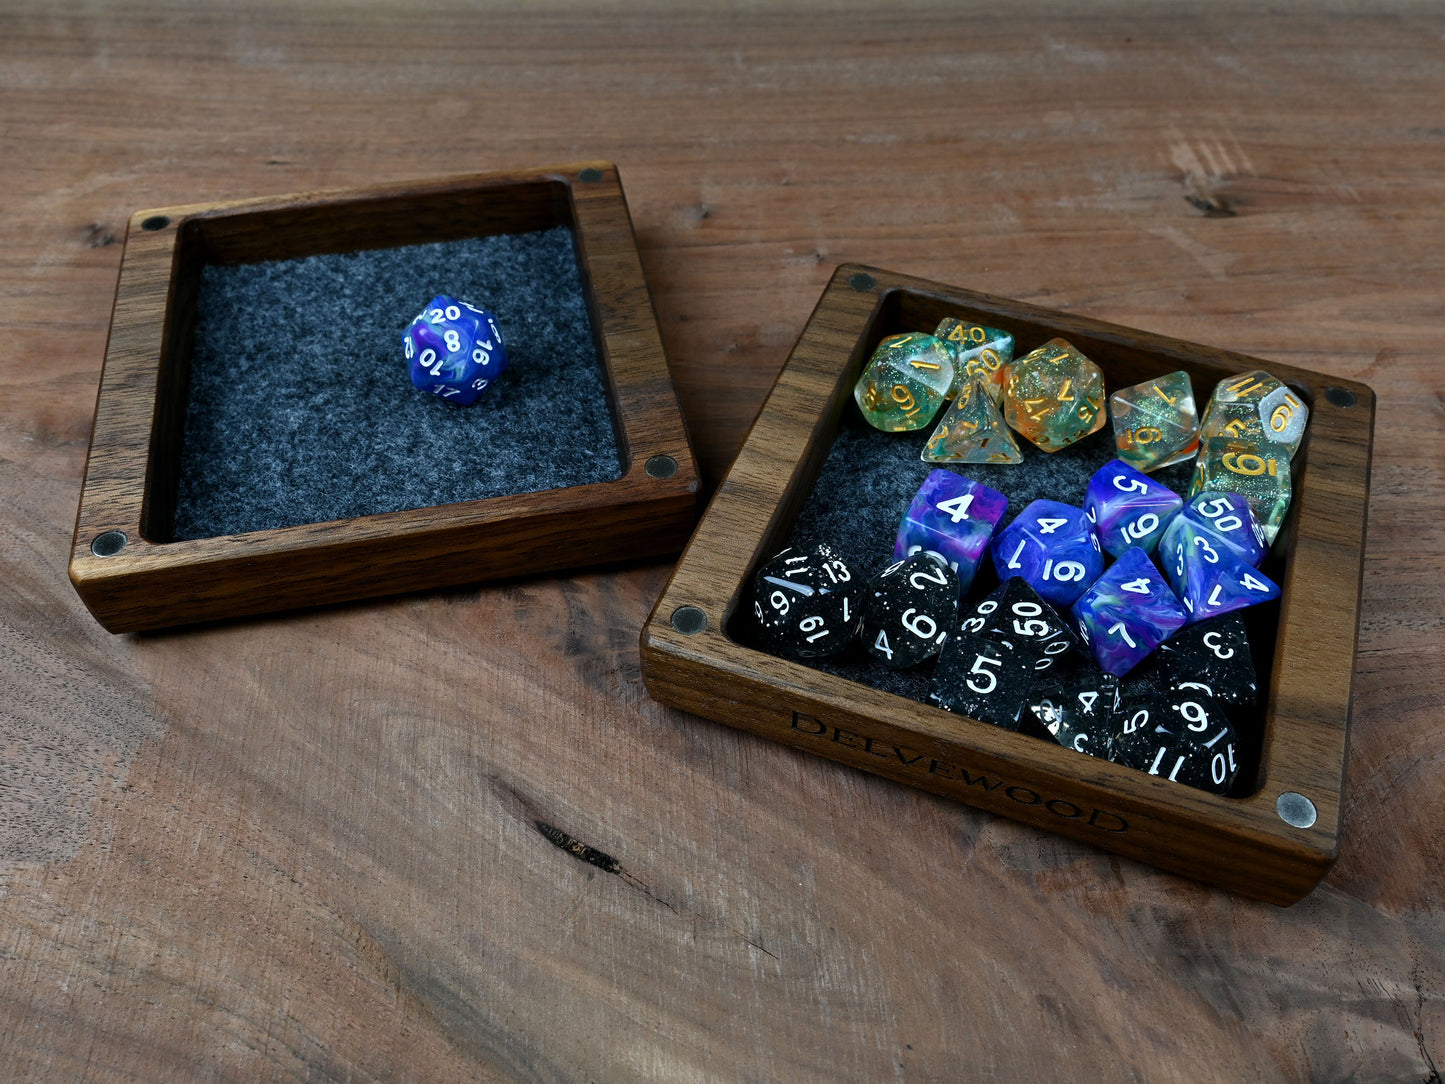 Walnut little delver dice box for dnd rpg dungeons & dragons